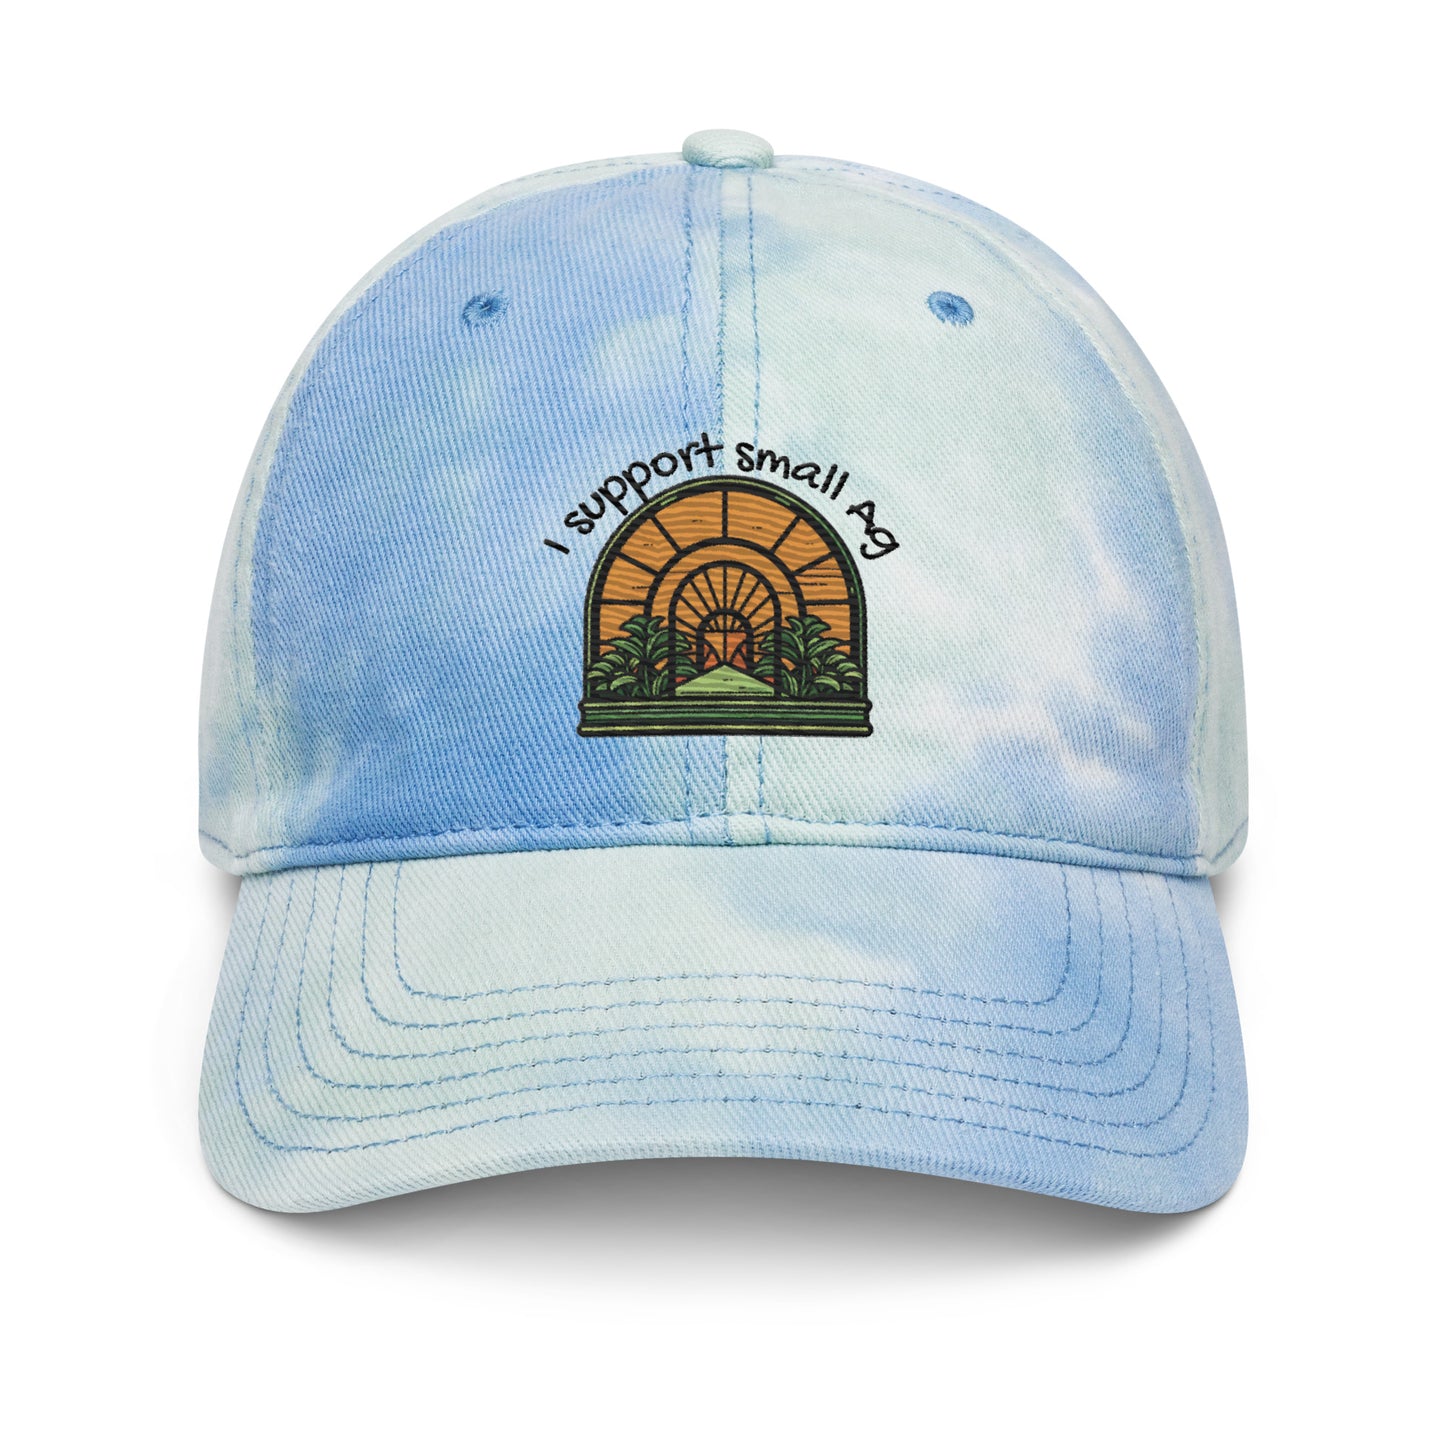 Tie dye hat: I Support Small Ag